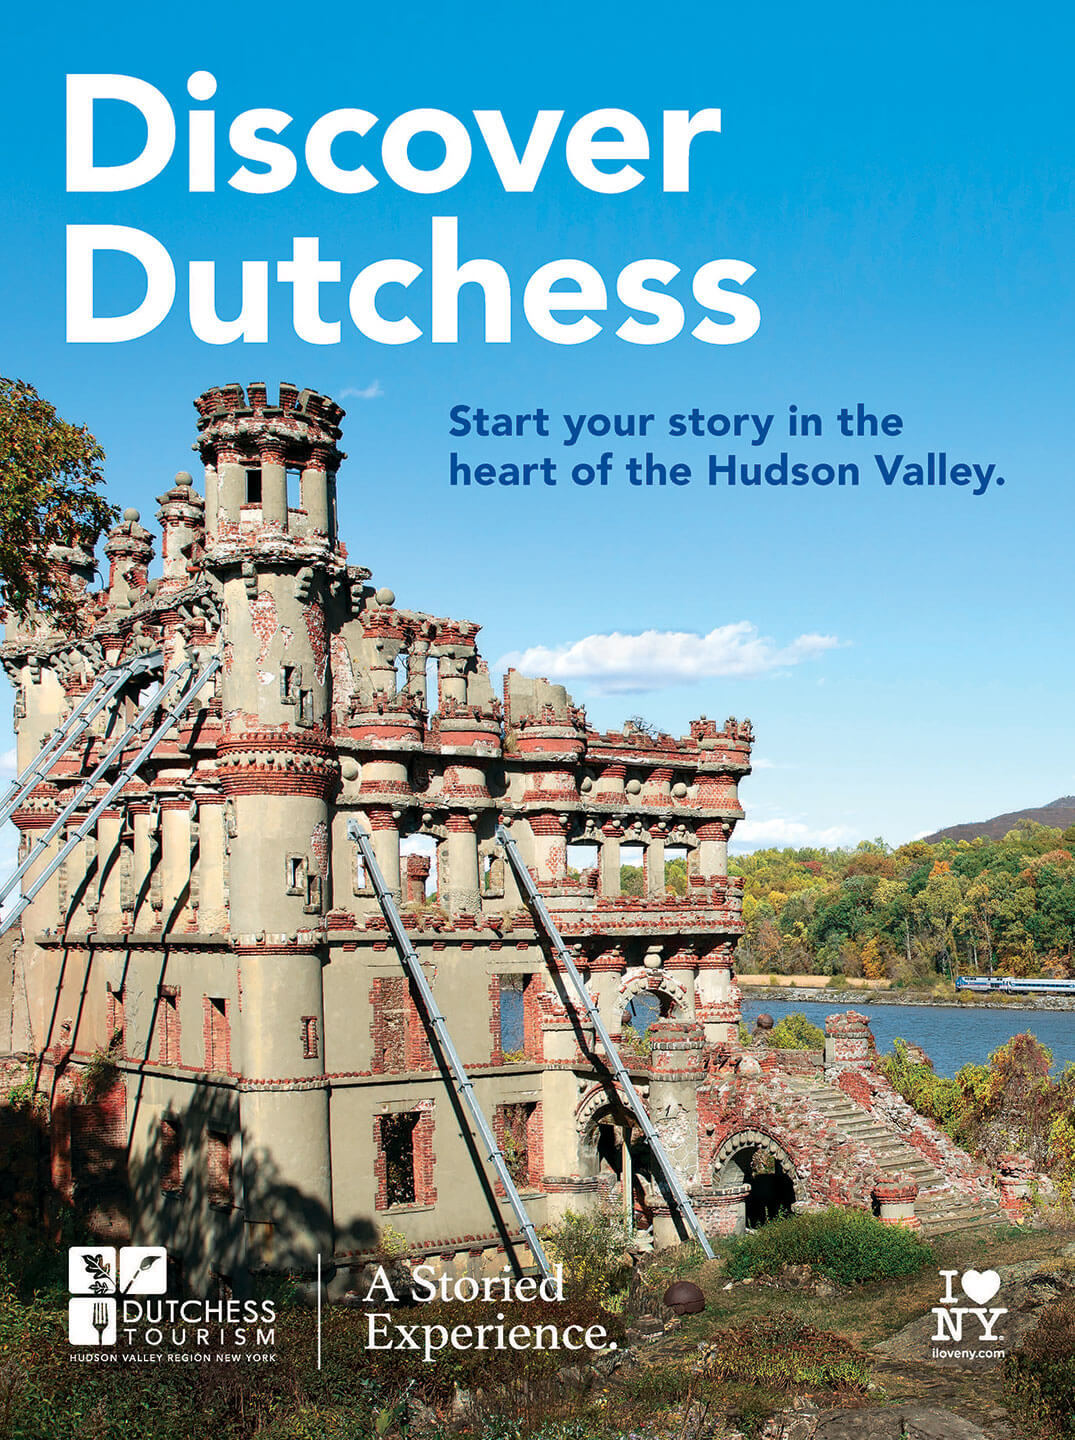 Find out what makes us Distinctly Dutchess!